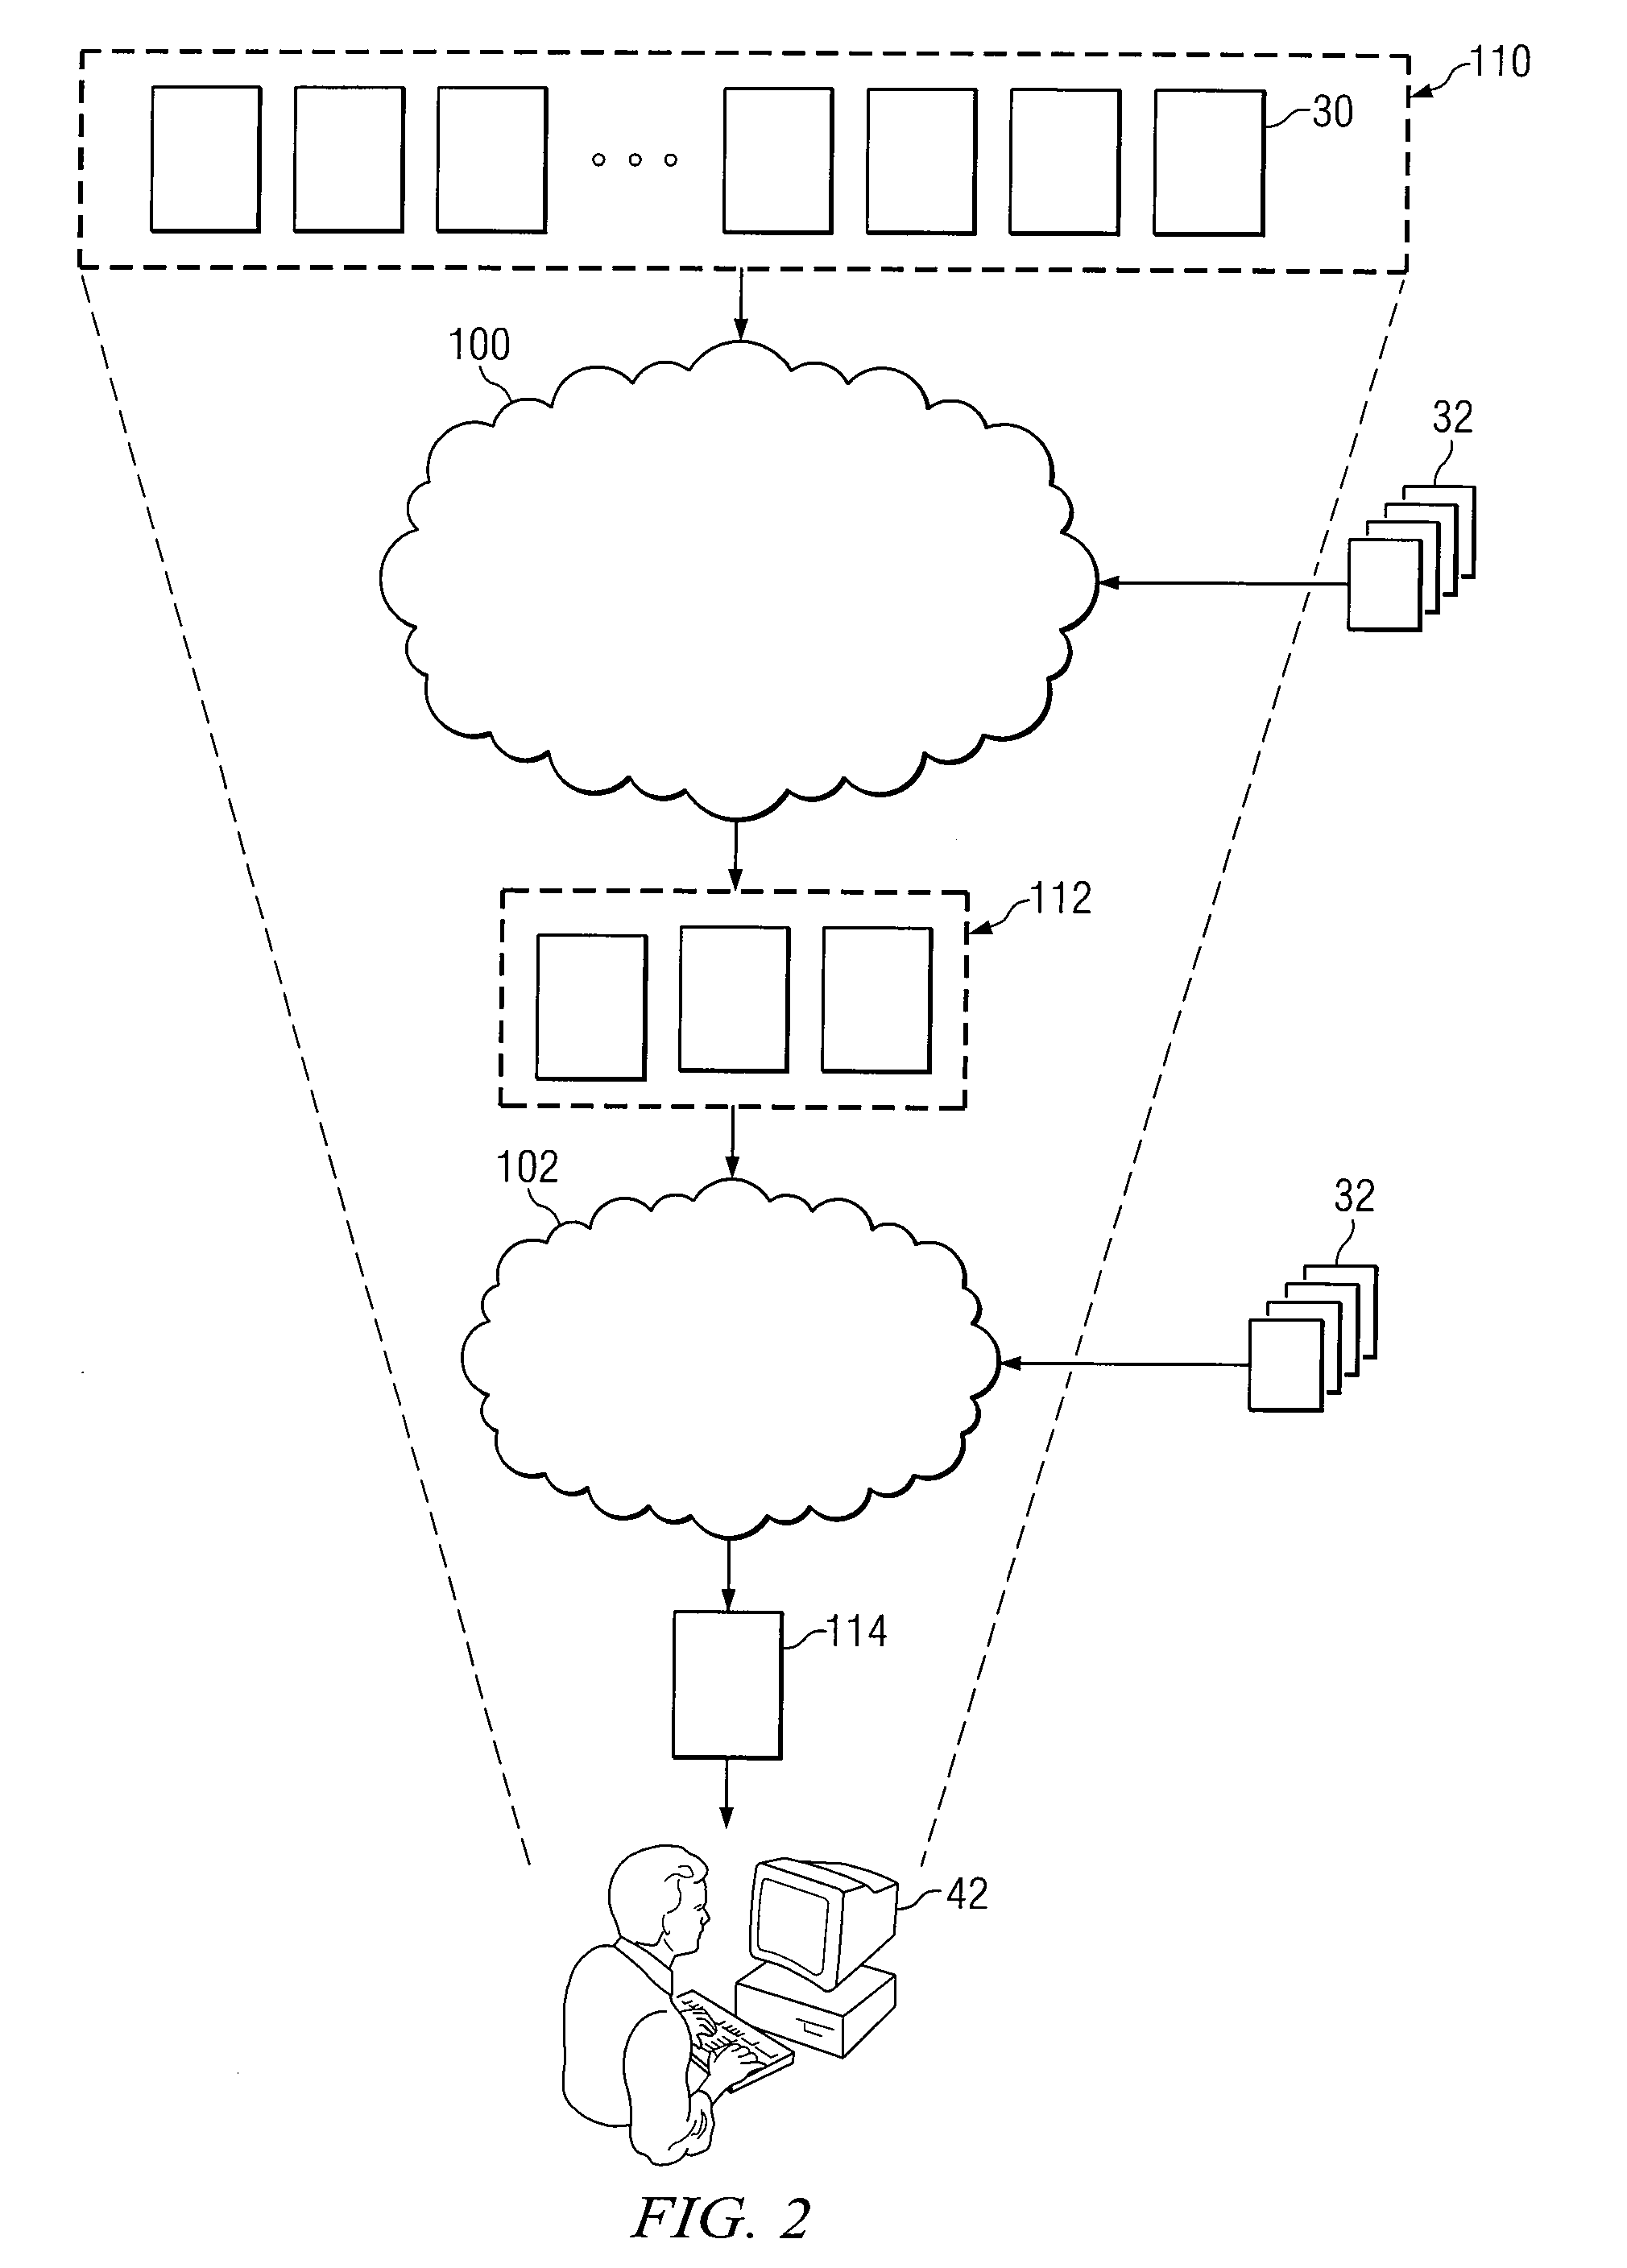 System and Method for Monitoring Content